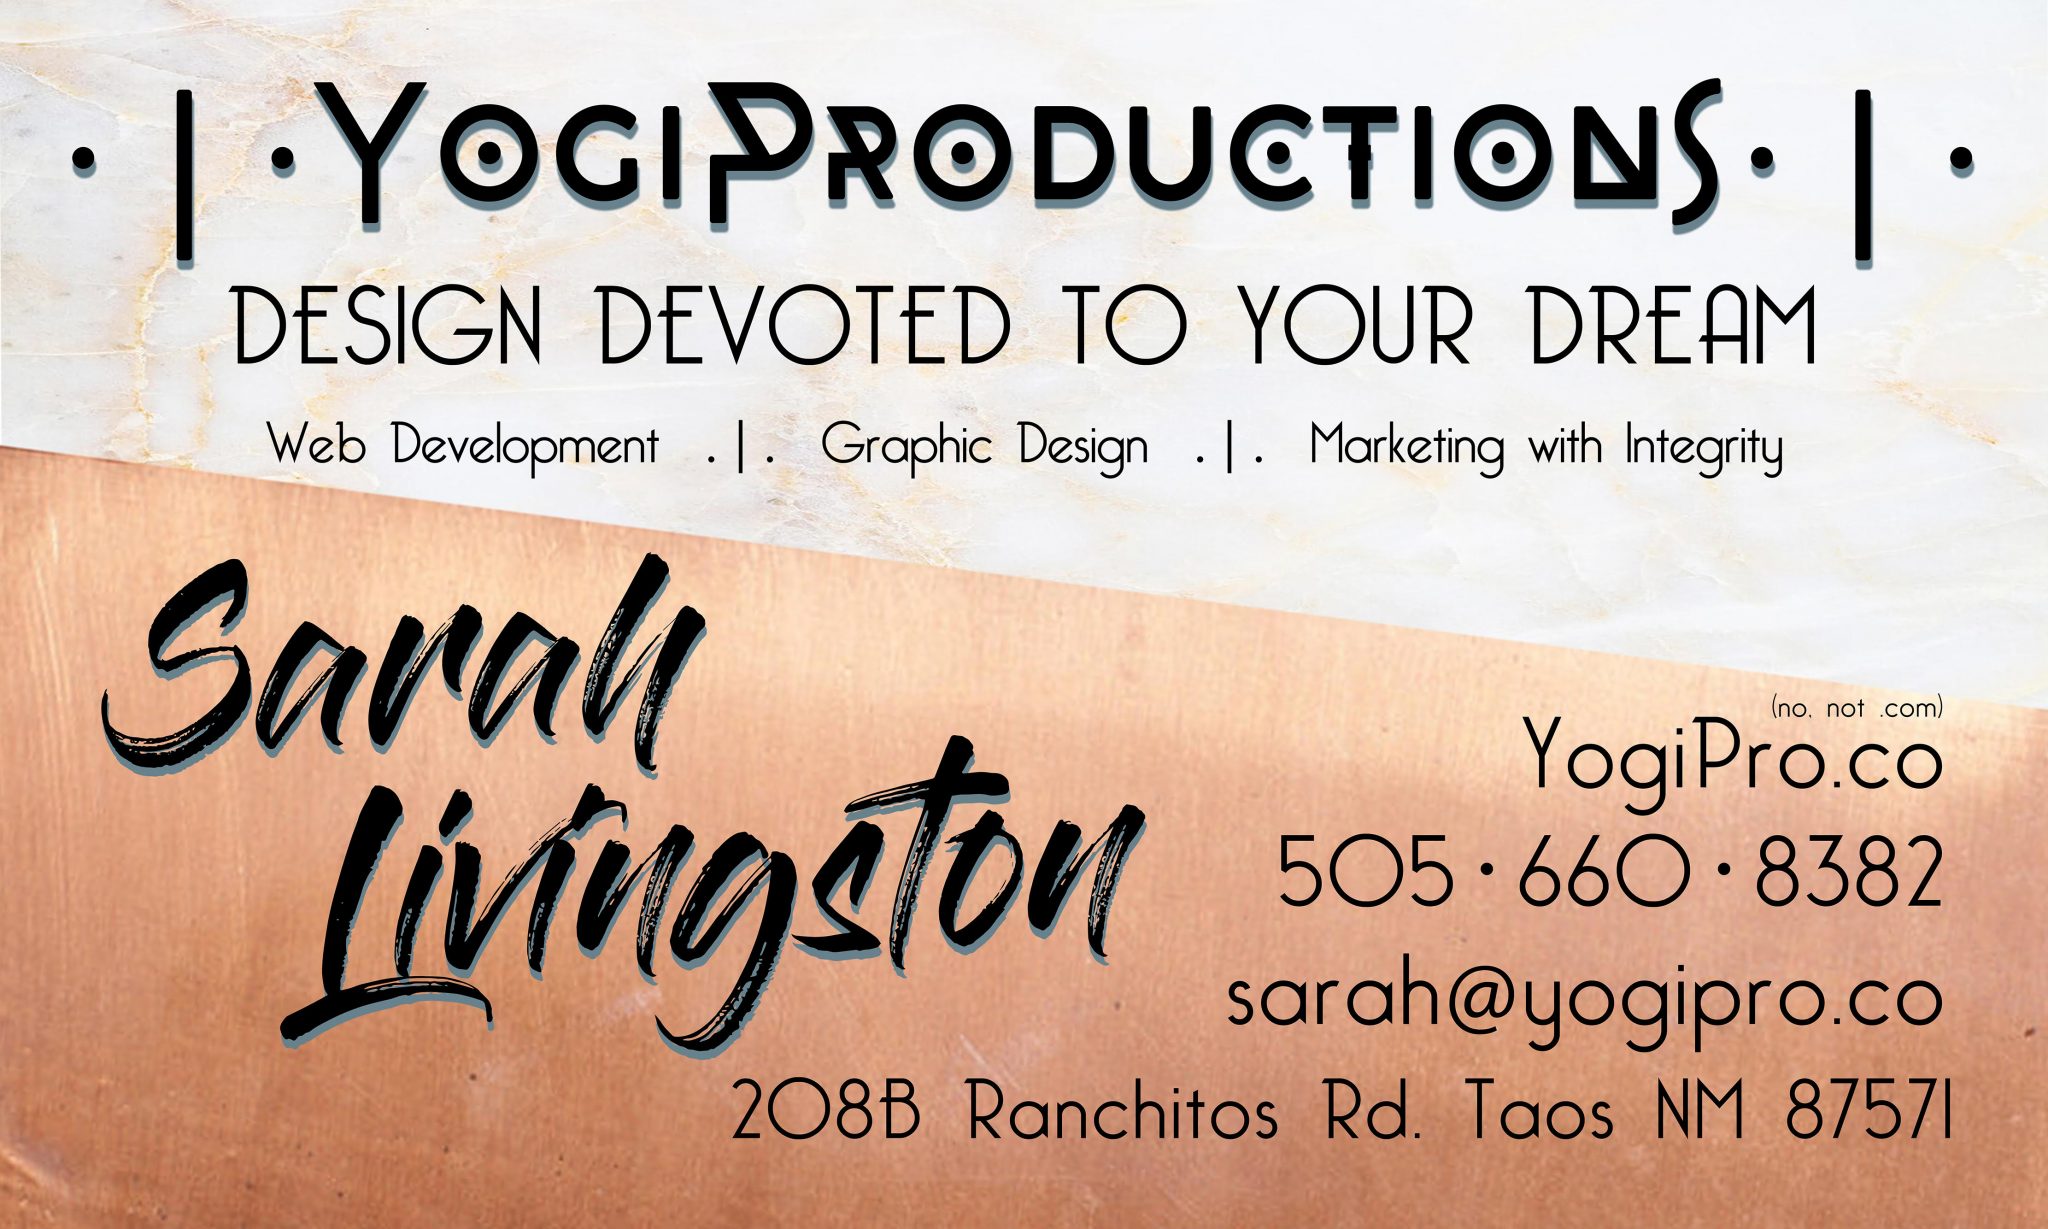 YogiProductions business cards